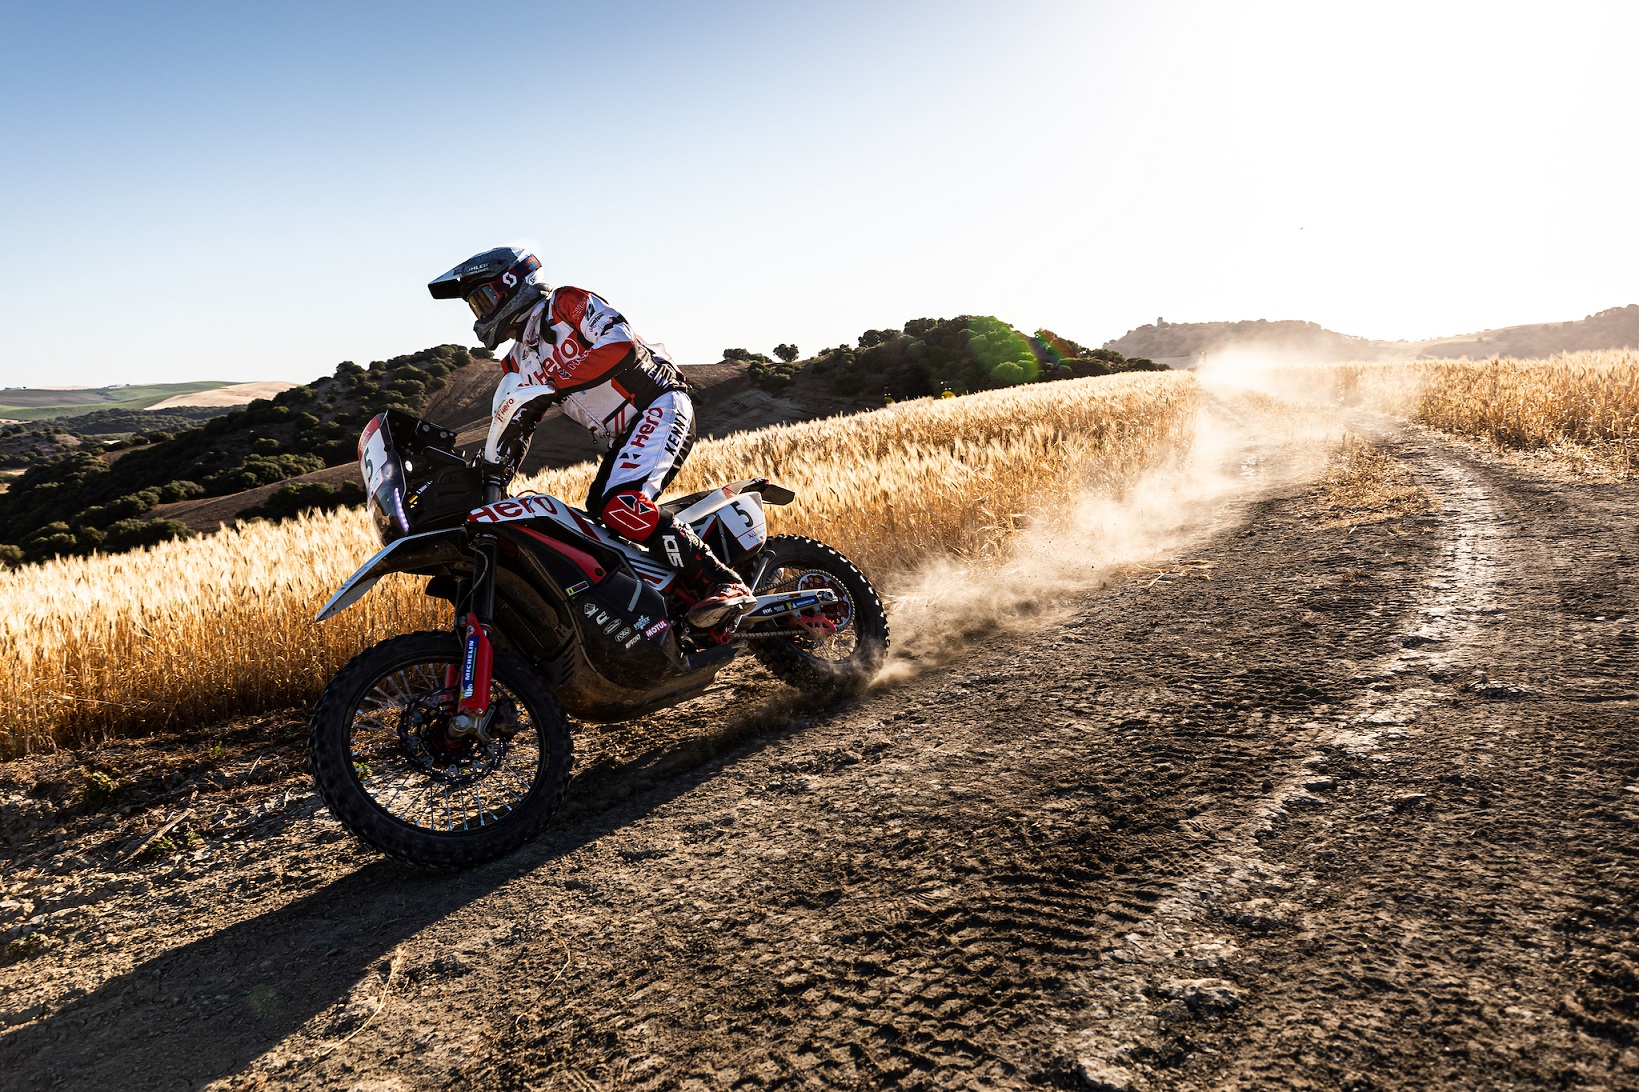 Hero Motosports Team Rally Delivers A Strong Show In The First Stage Of Andalucia Rally